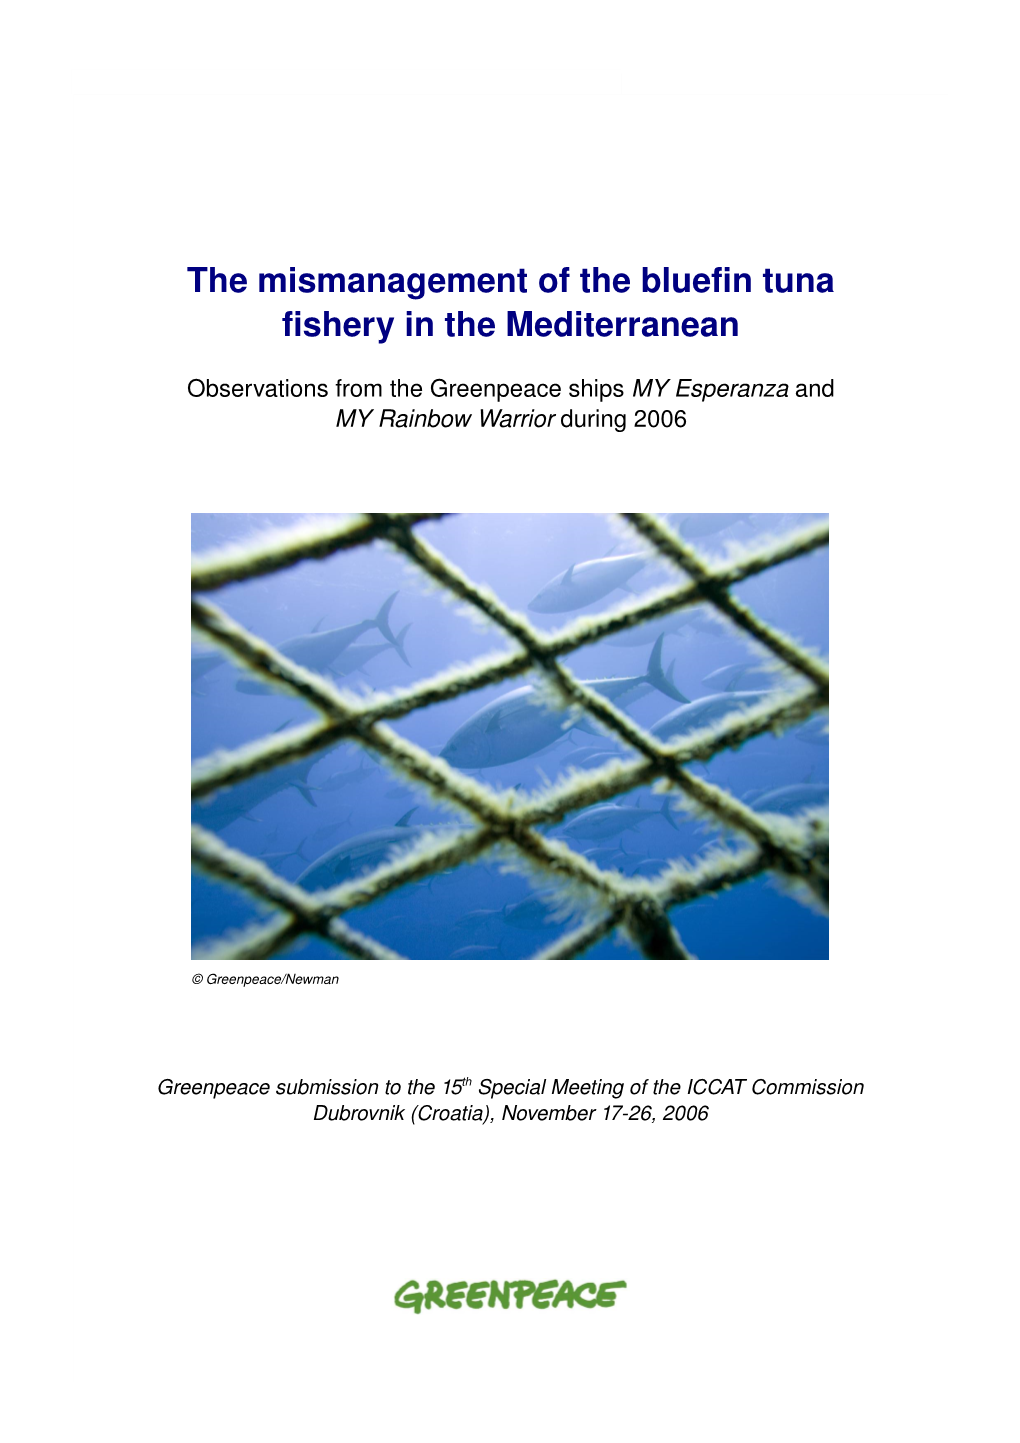 The Mismanagement of the Bluefin Tuna Fishery in the Mediterranean